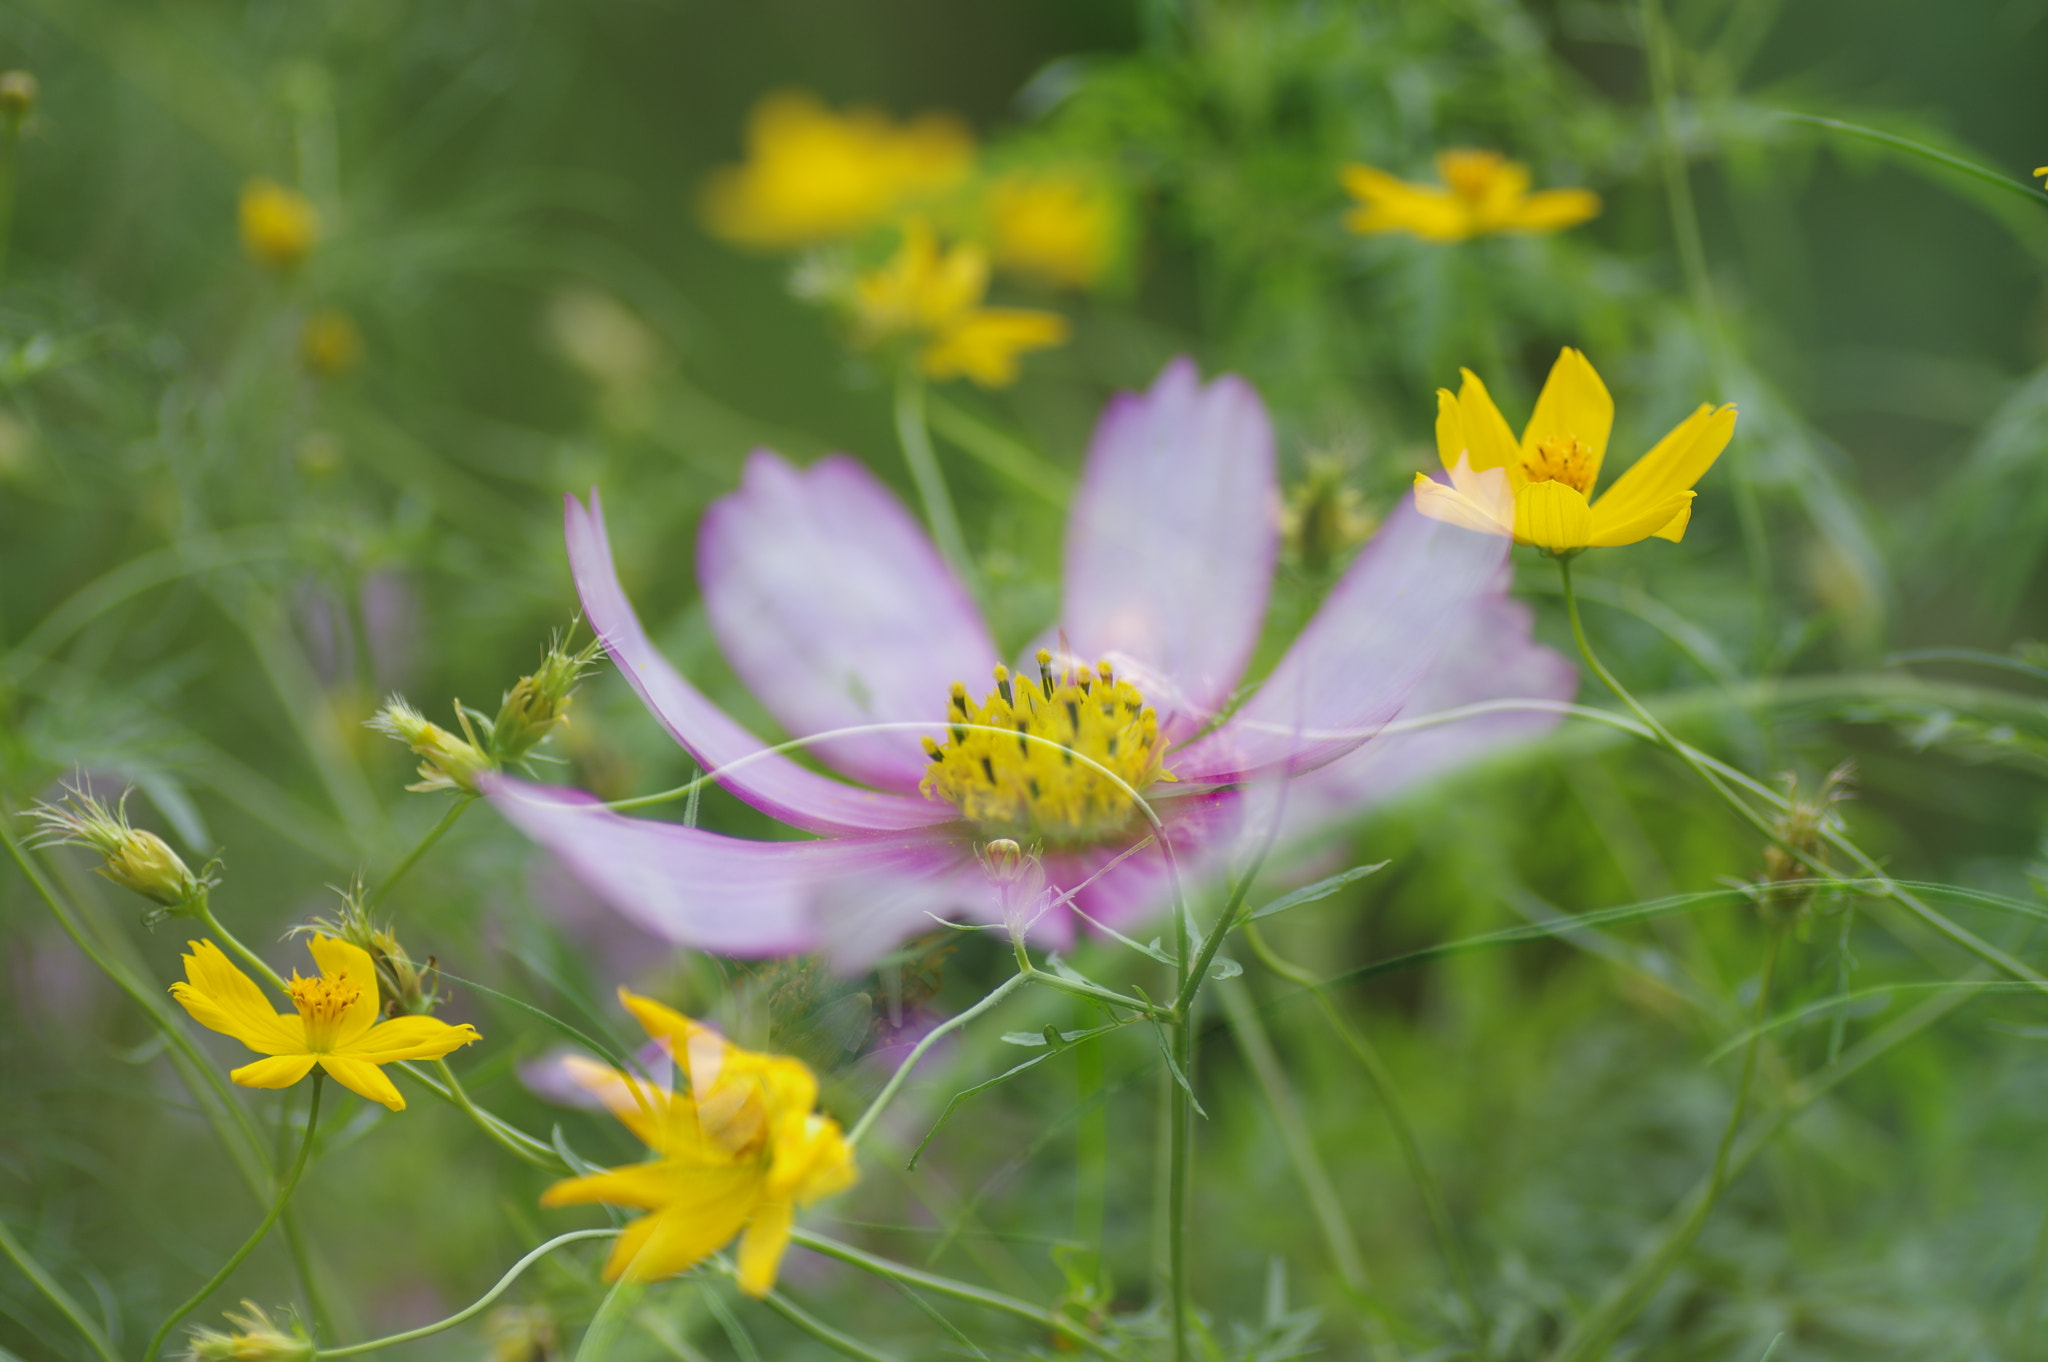 Pentax K-3 II sample photo. Cosmos that emerges photography